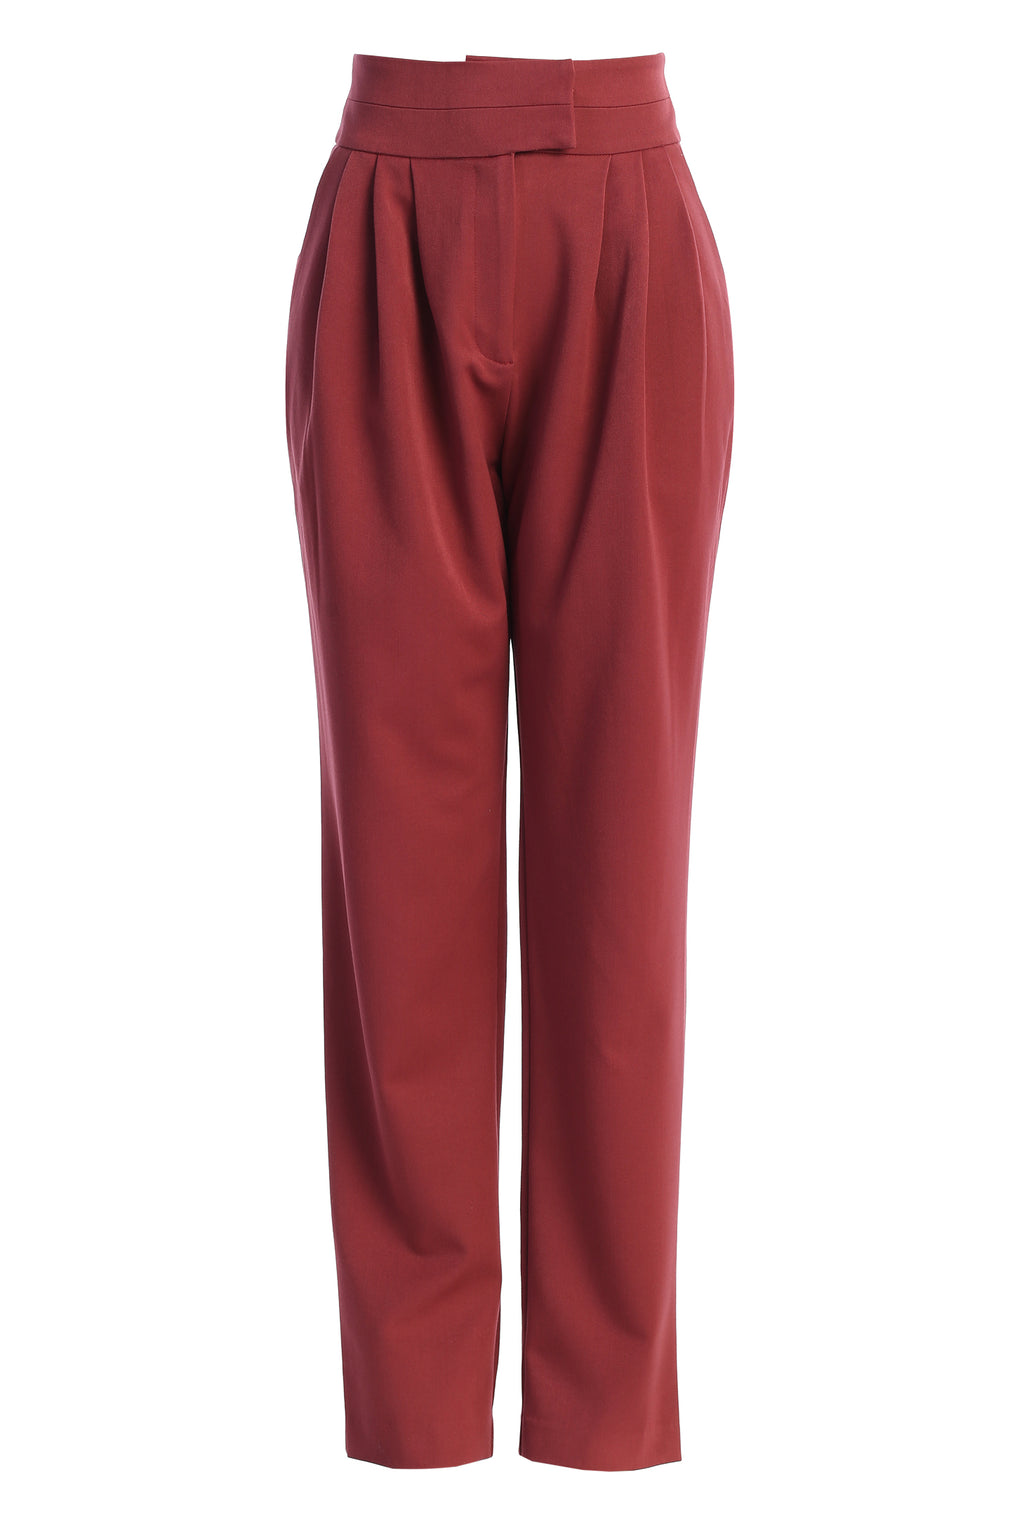 Berry Aerin Trousers | JLUXLABEL